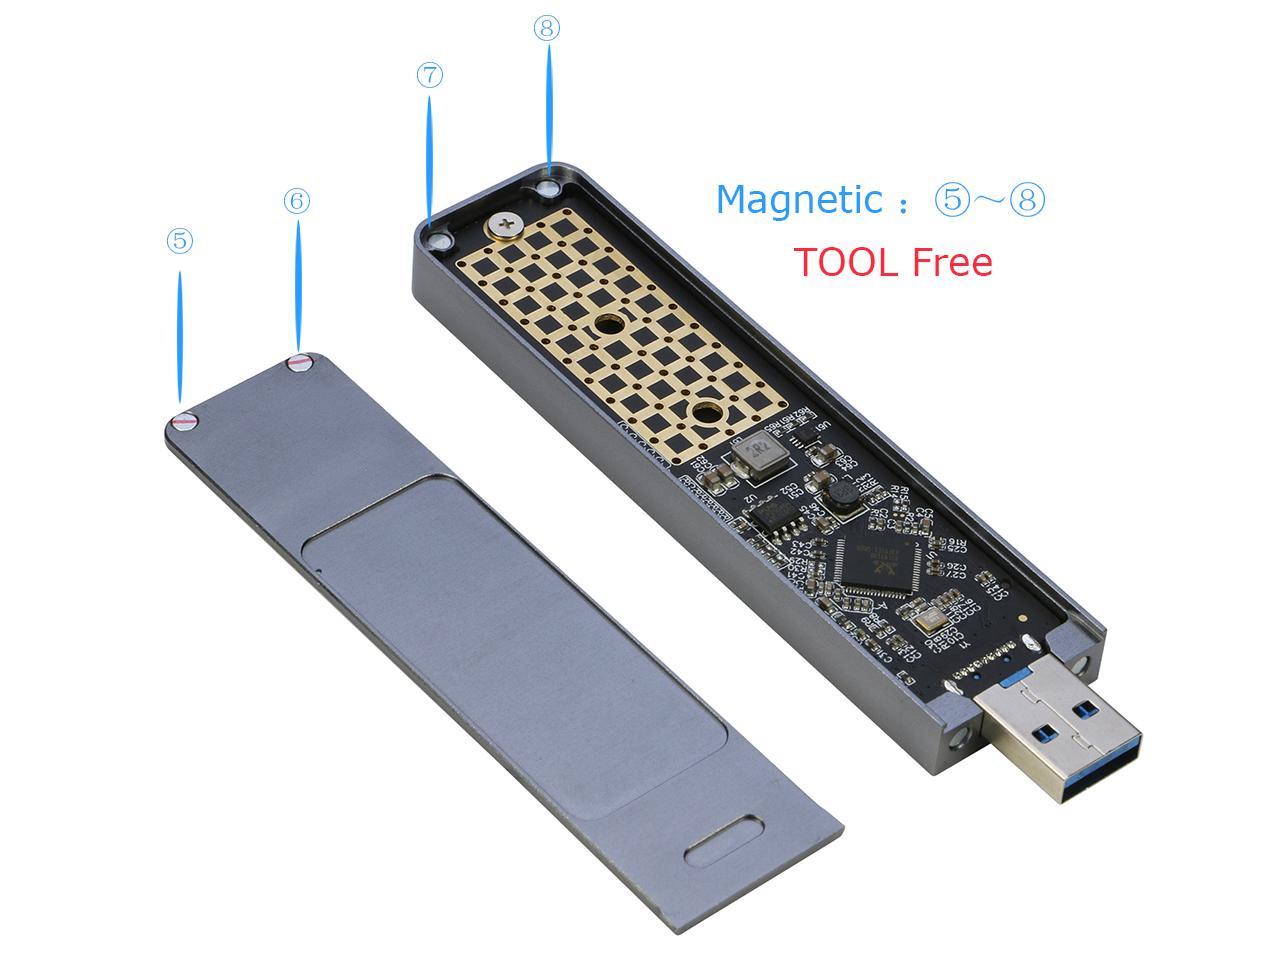 M2 Nvme And Sata Ssd To Usb Enclosure Adapter Riitop M2 To Usb 31 Type A Reader For Both B Key 8120